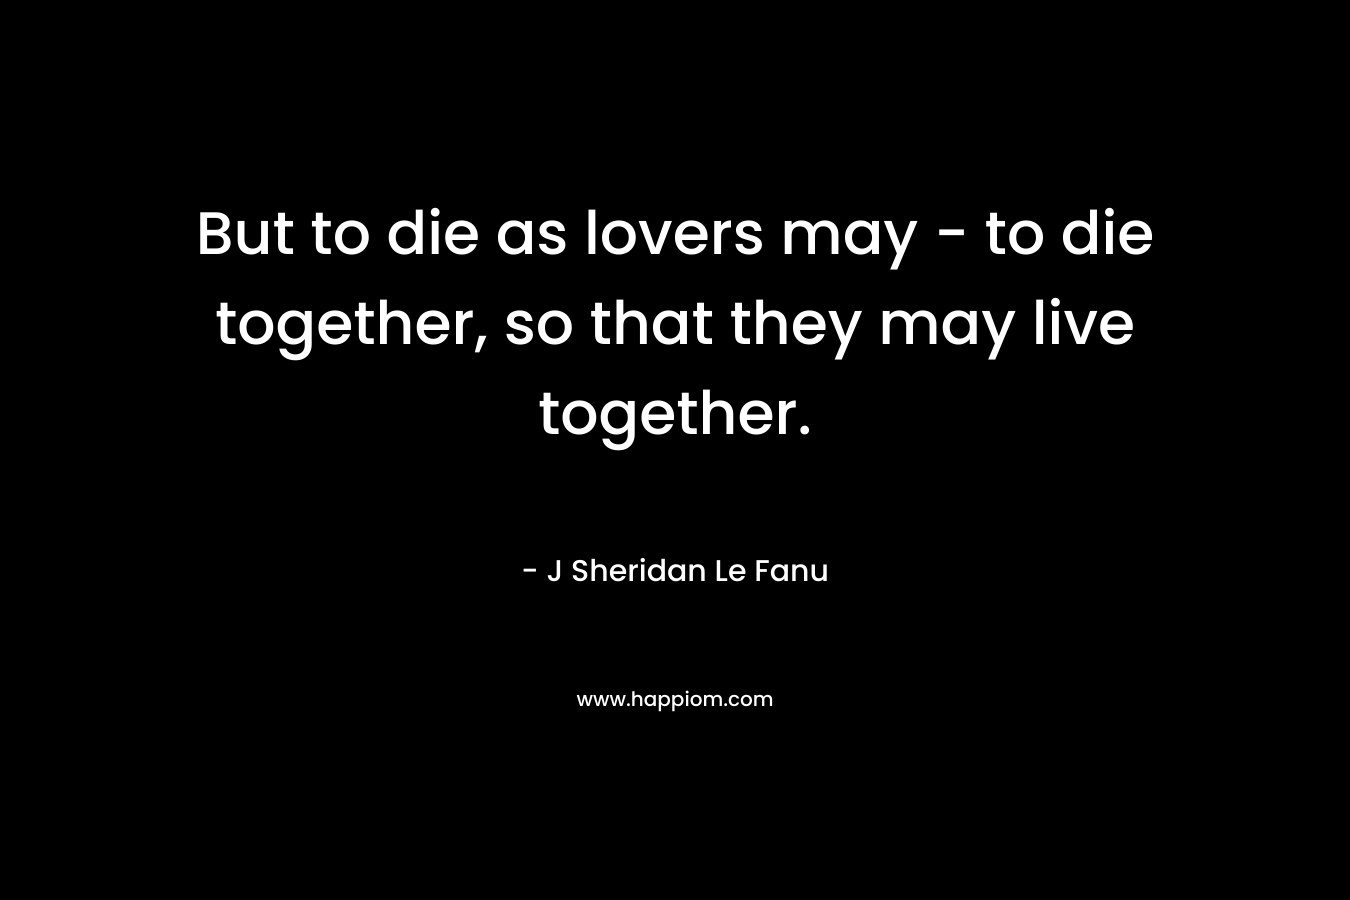 But to die as lovers may - to die together, so that they may live together.